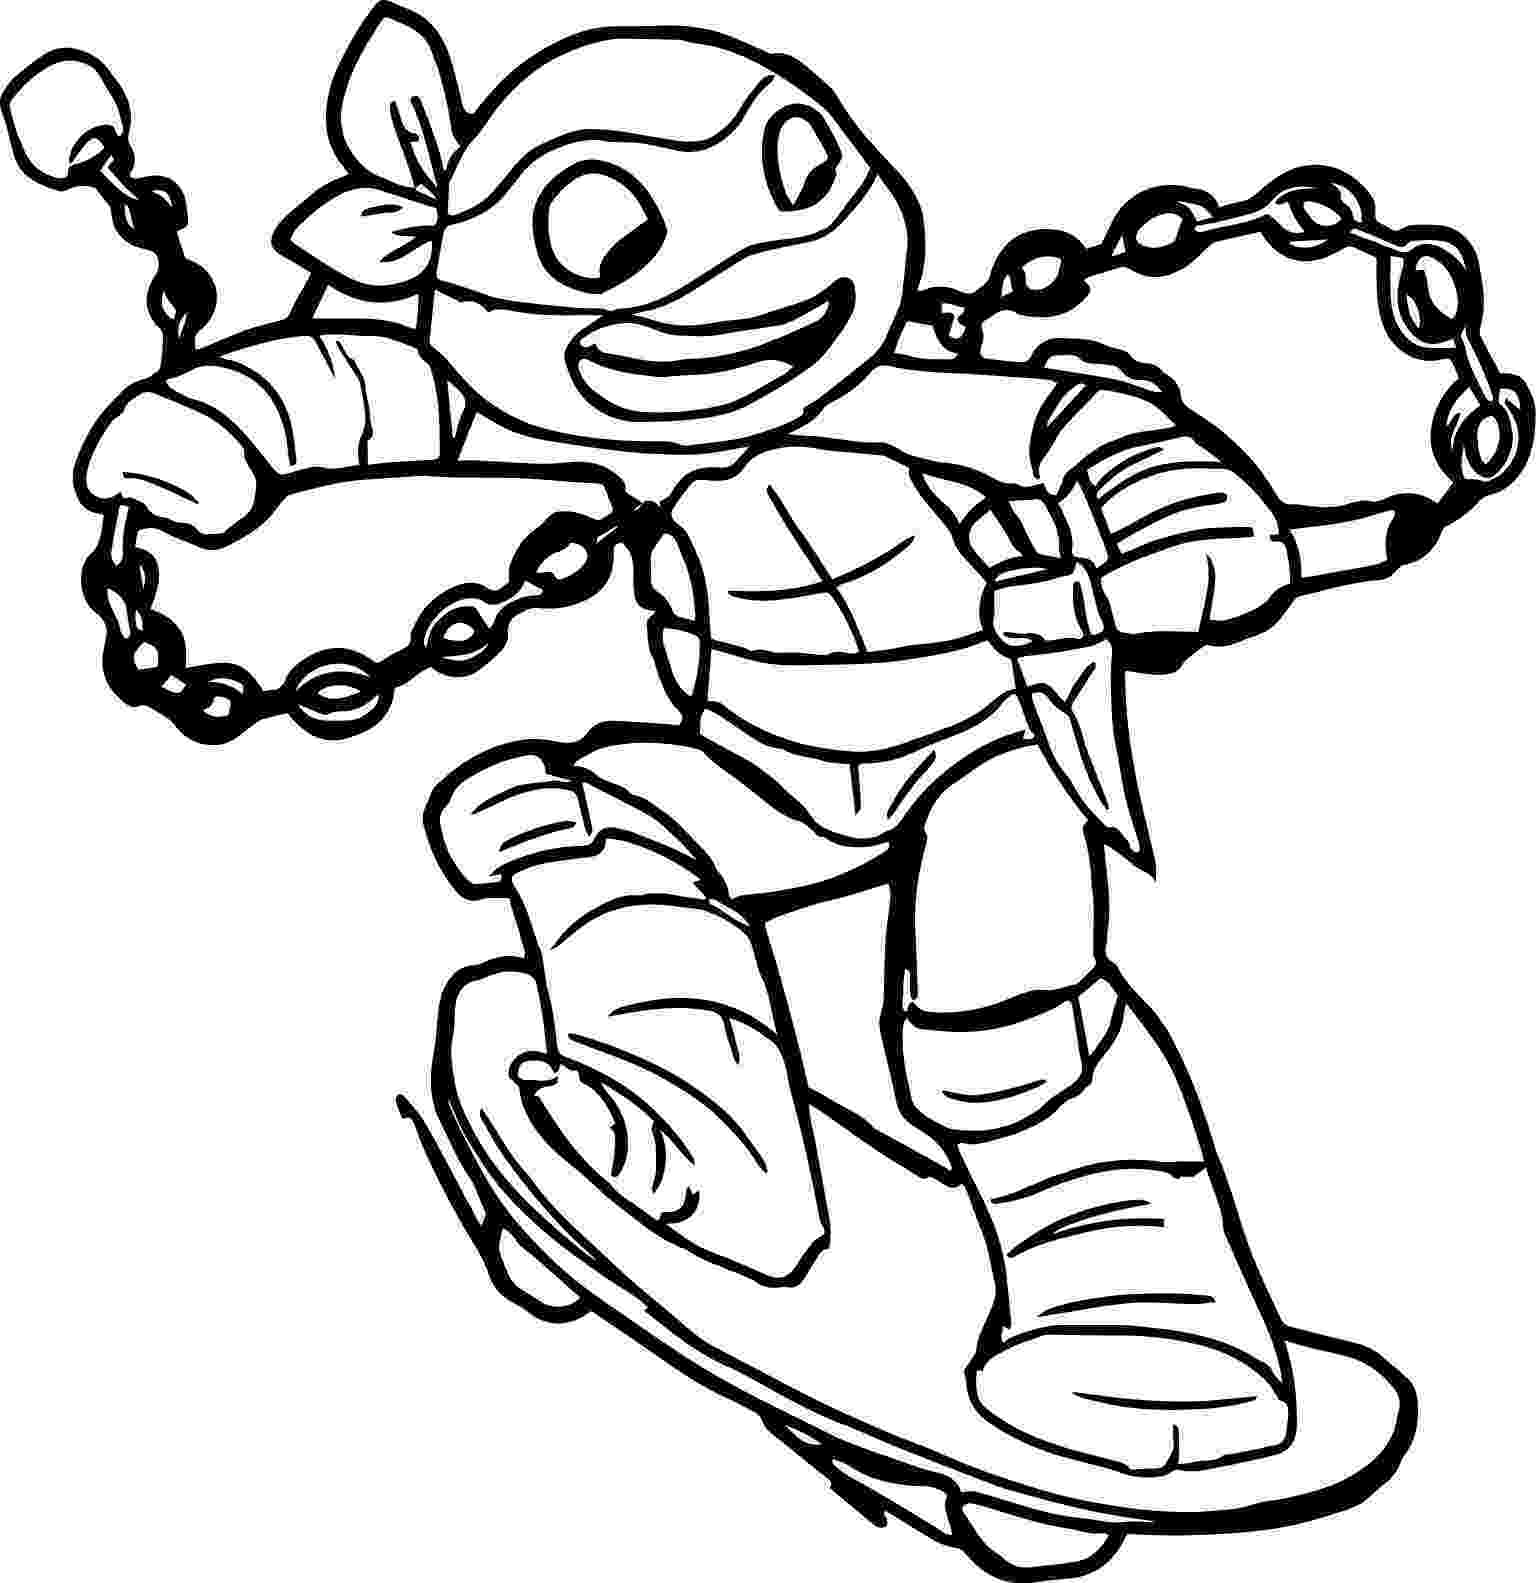 ninja turtles coloring pictures get this teenage mutant ninja turtles coloring pages free turtles pictures coloring ninja 